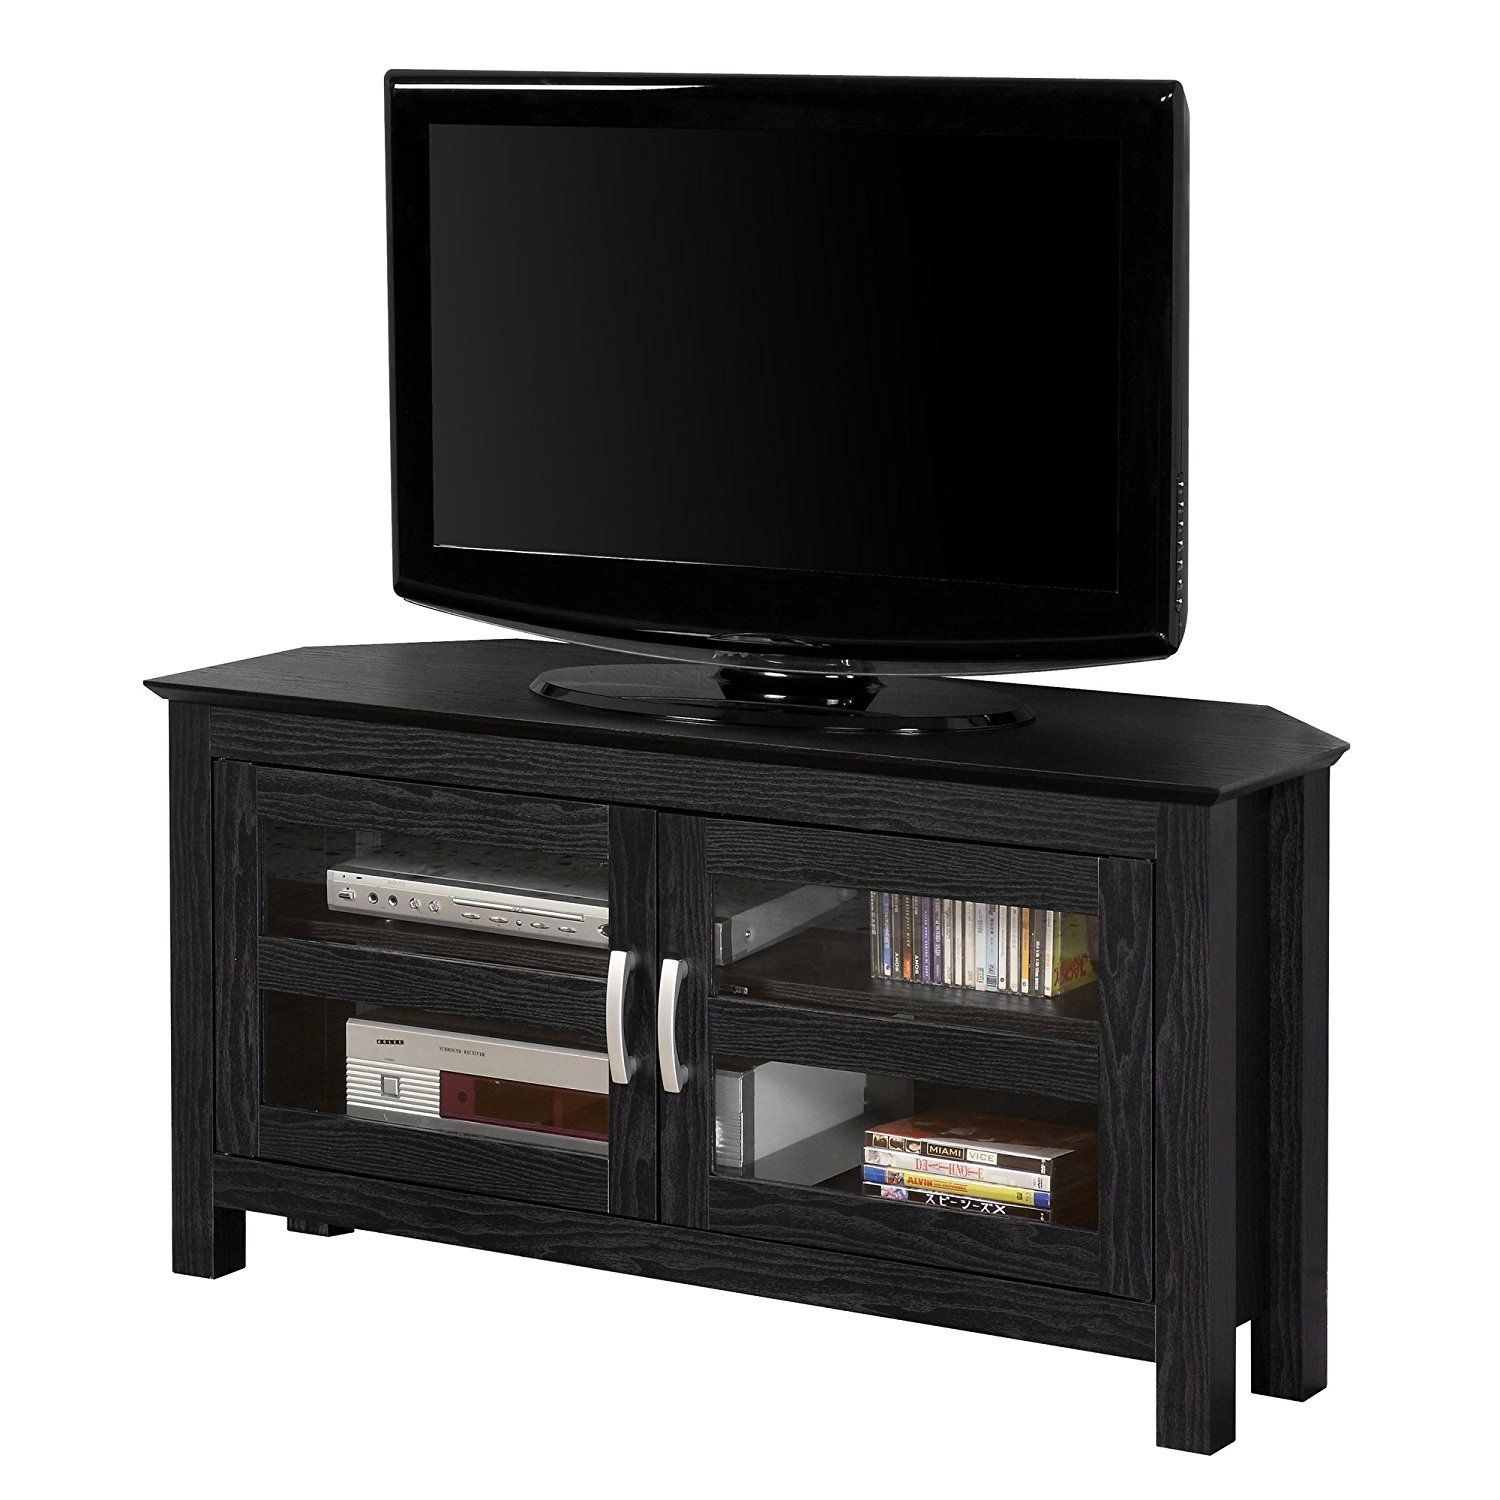 Corner Black Tv Stand Flat Screen 44 Inch Television Pertaining To Corner Tv Cabinets For Flat Screens (View 10 of 15)